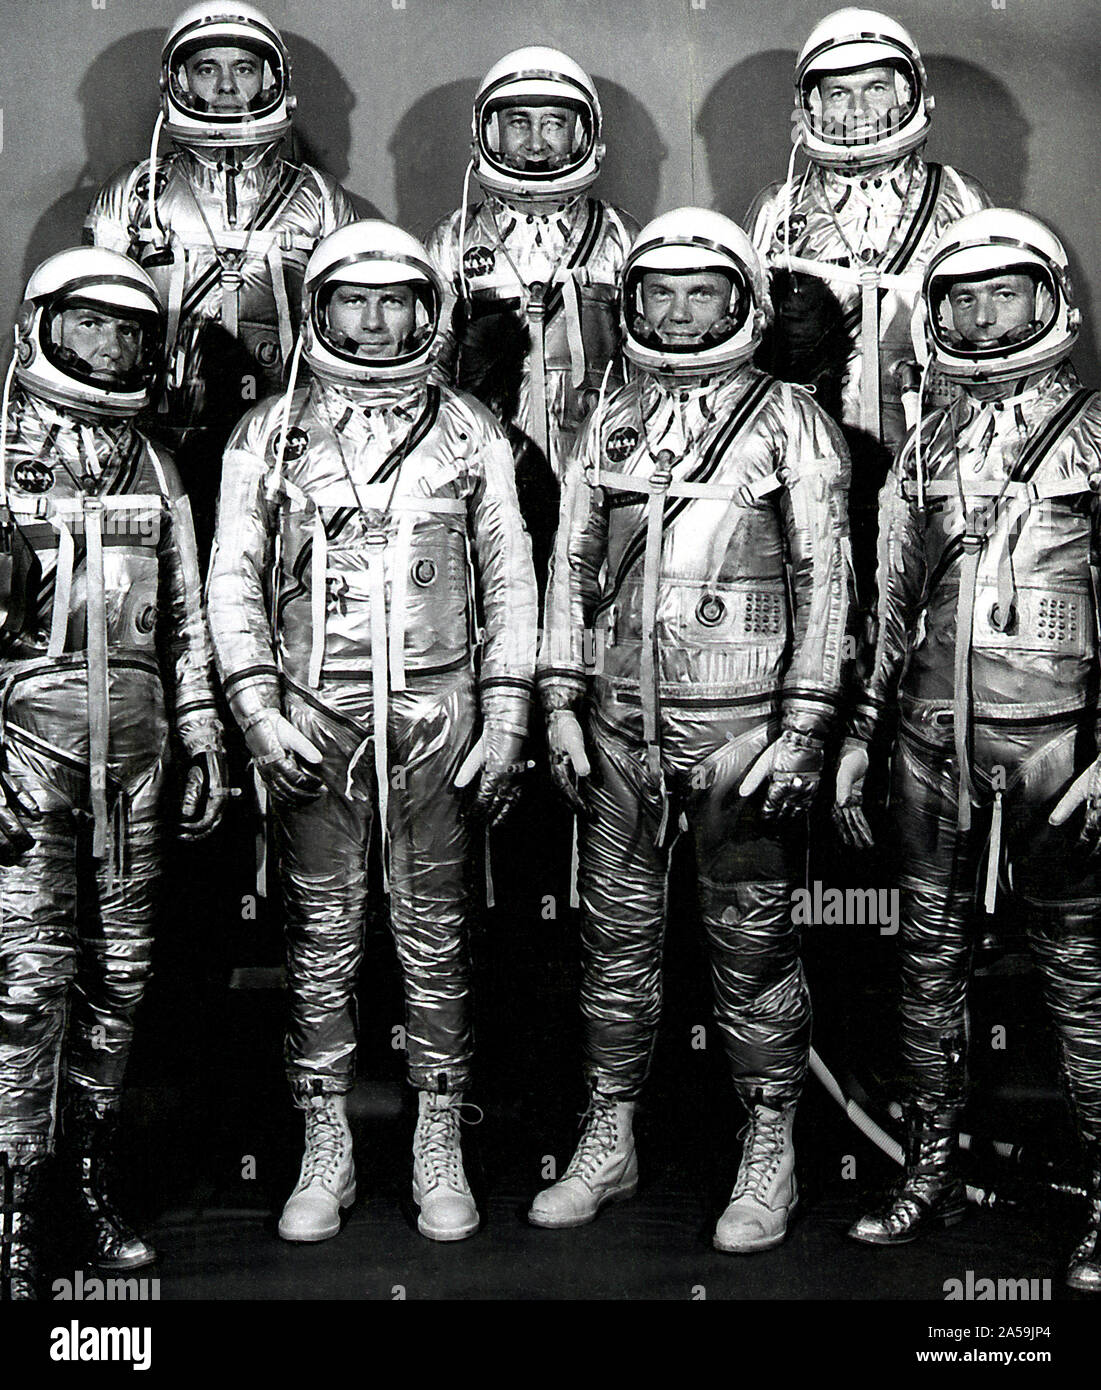 The group portrait of the original seven astronauts for the Mercury Project. NASA selected its first seven astronauts on April 27, 1959. Left to right at front: Walter M. Wally Schirra, Donald K. Deke Slayton, John H. Glenn, Jr., and Scott Carpenter. Left to right at rear: Alan B. Shepard, Virgil I. Gus Grissom, and L. Gordon Cooper, Jr. Stock Photo